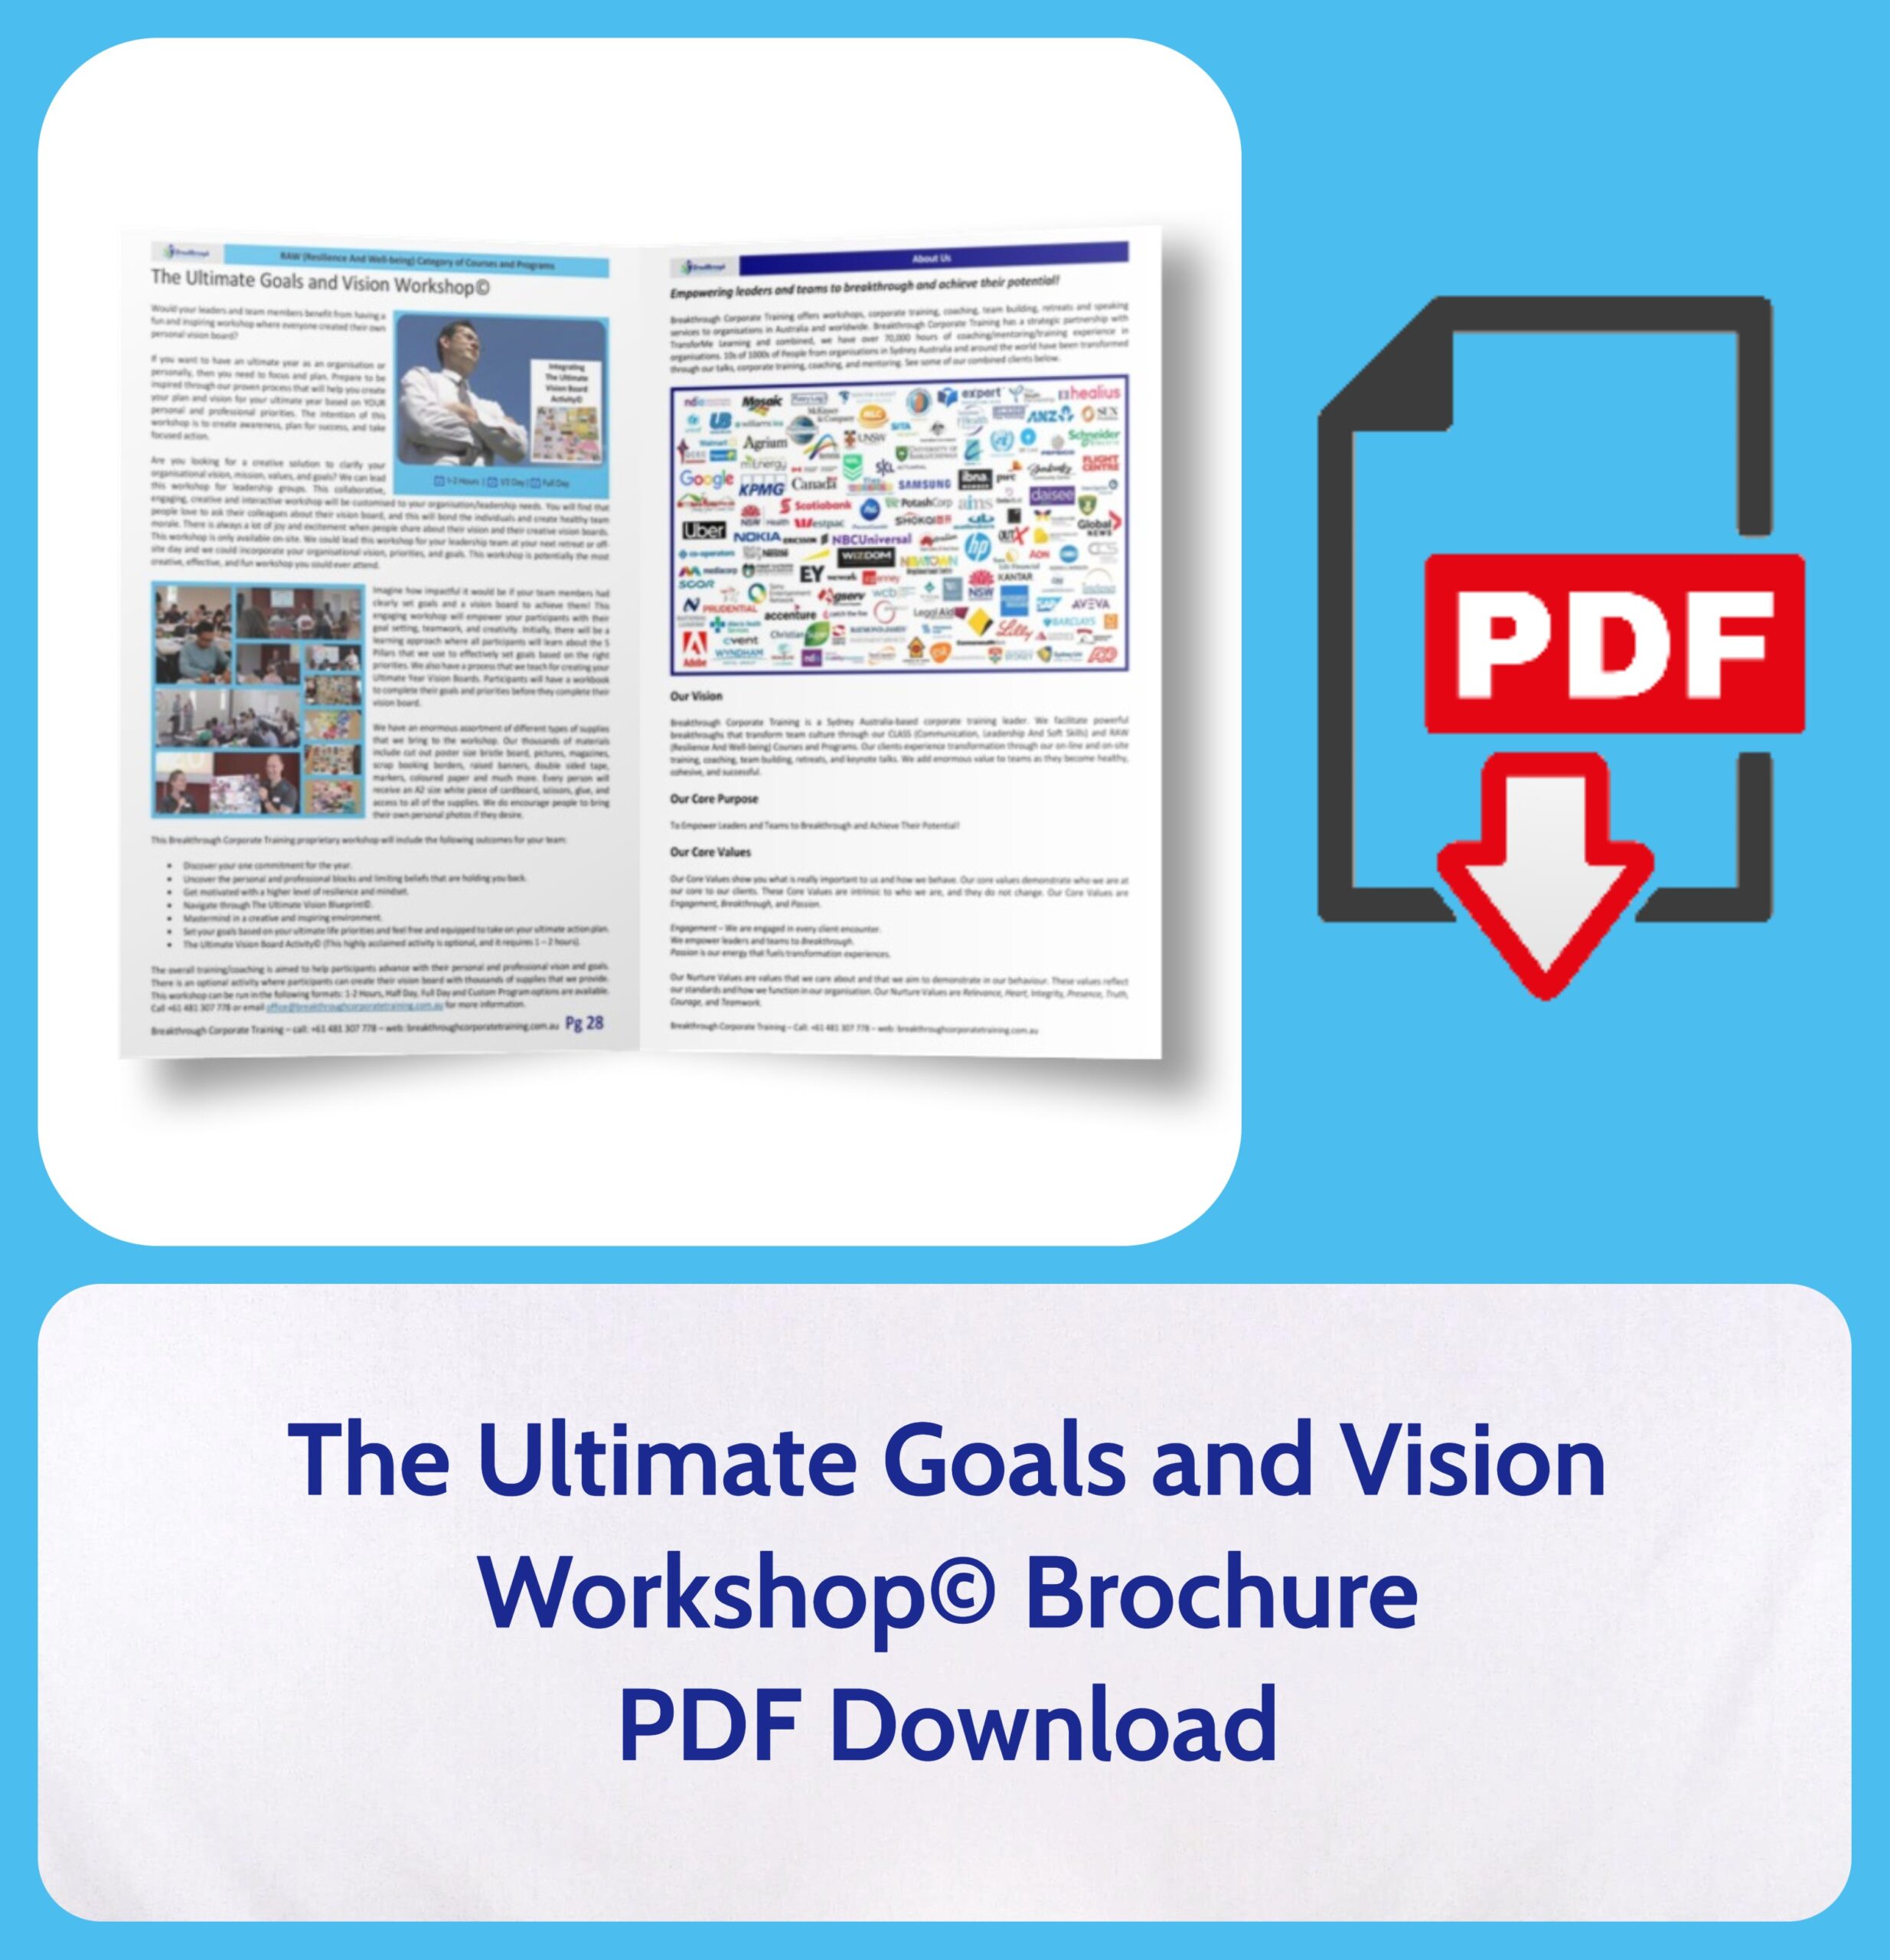 The Ultimate Goals and Vision Workshop